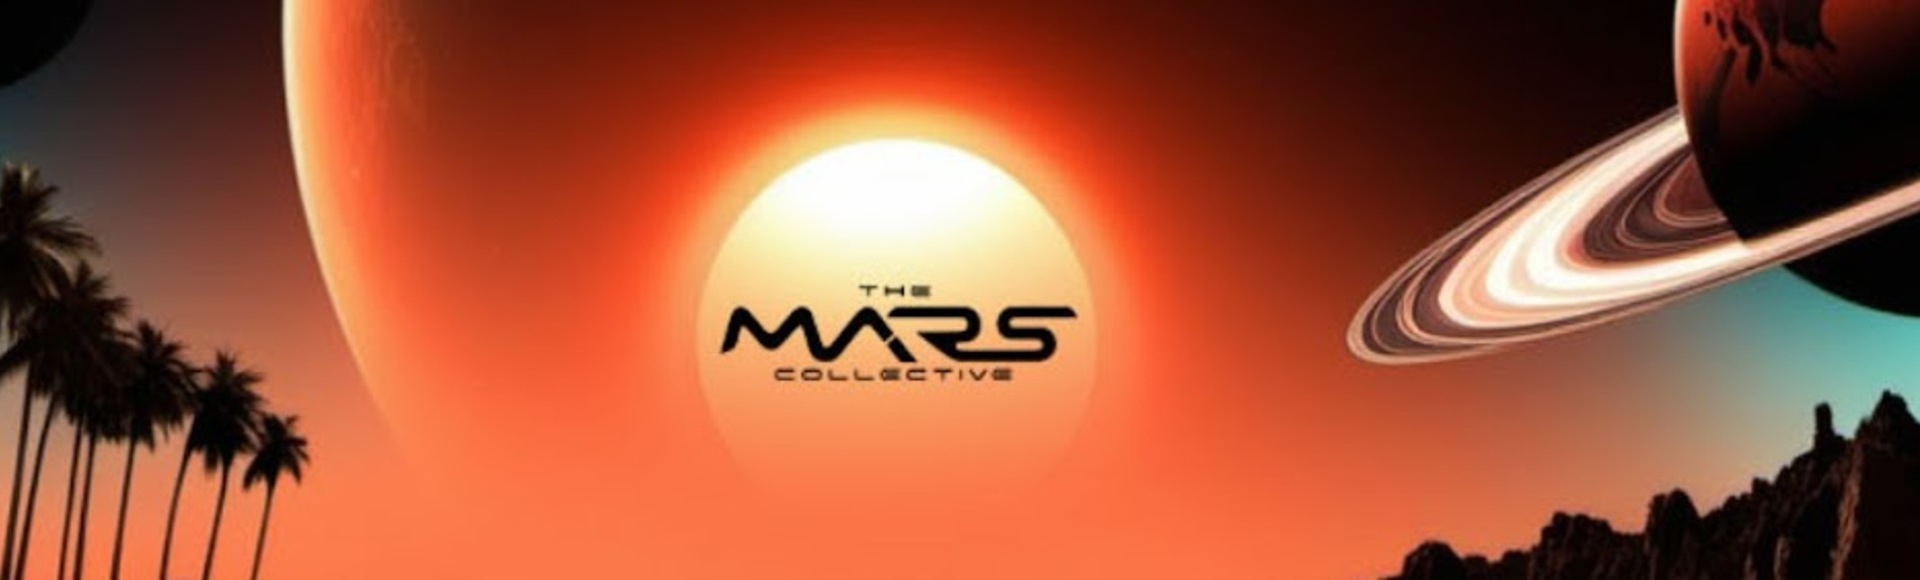 The Mars Collective